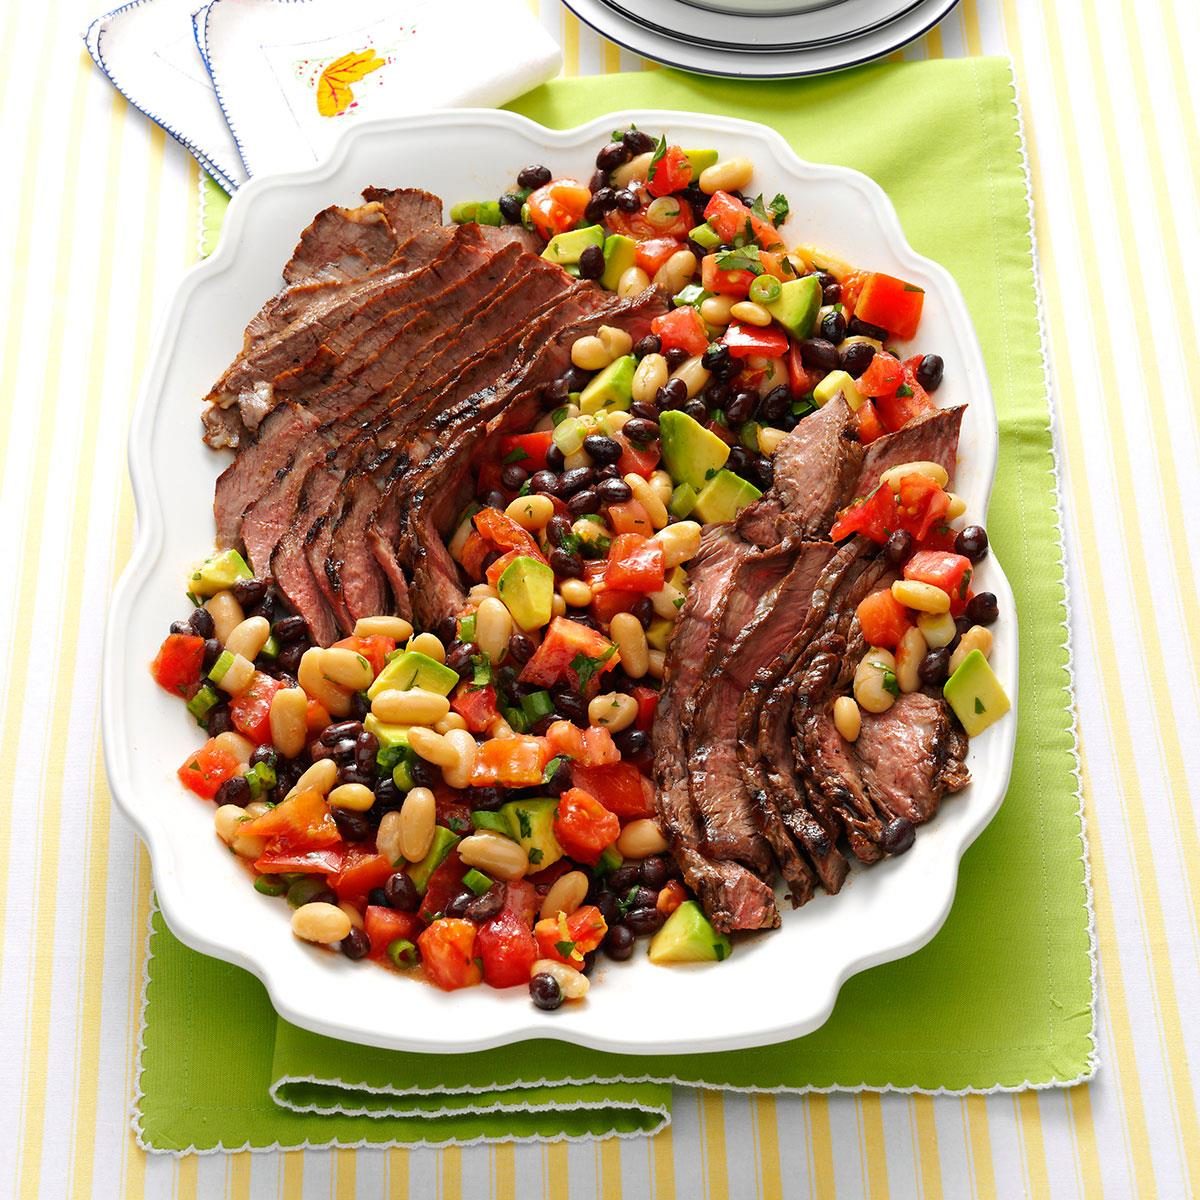 https://www.tasteofhome.com/wp-content/uploads/2018/01/Grilled-Steak-Salad-with-Tomatoes-Avocado_exps147474_TH143192B02_06_2bC_RMS.jpg?fit=700%2C1024